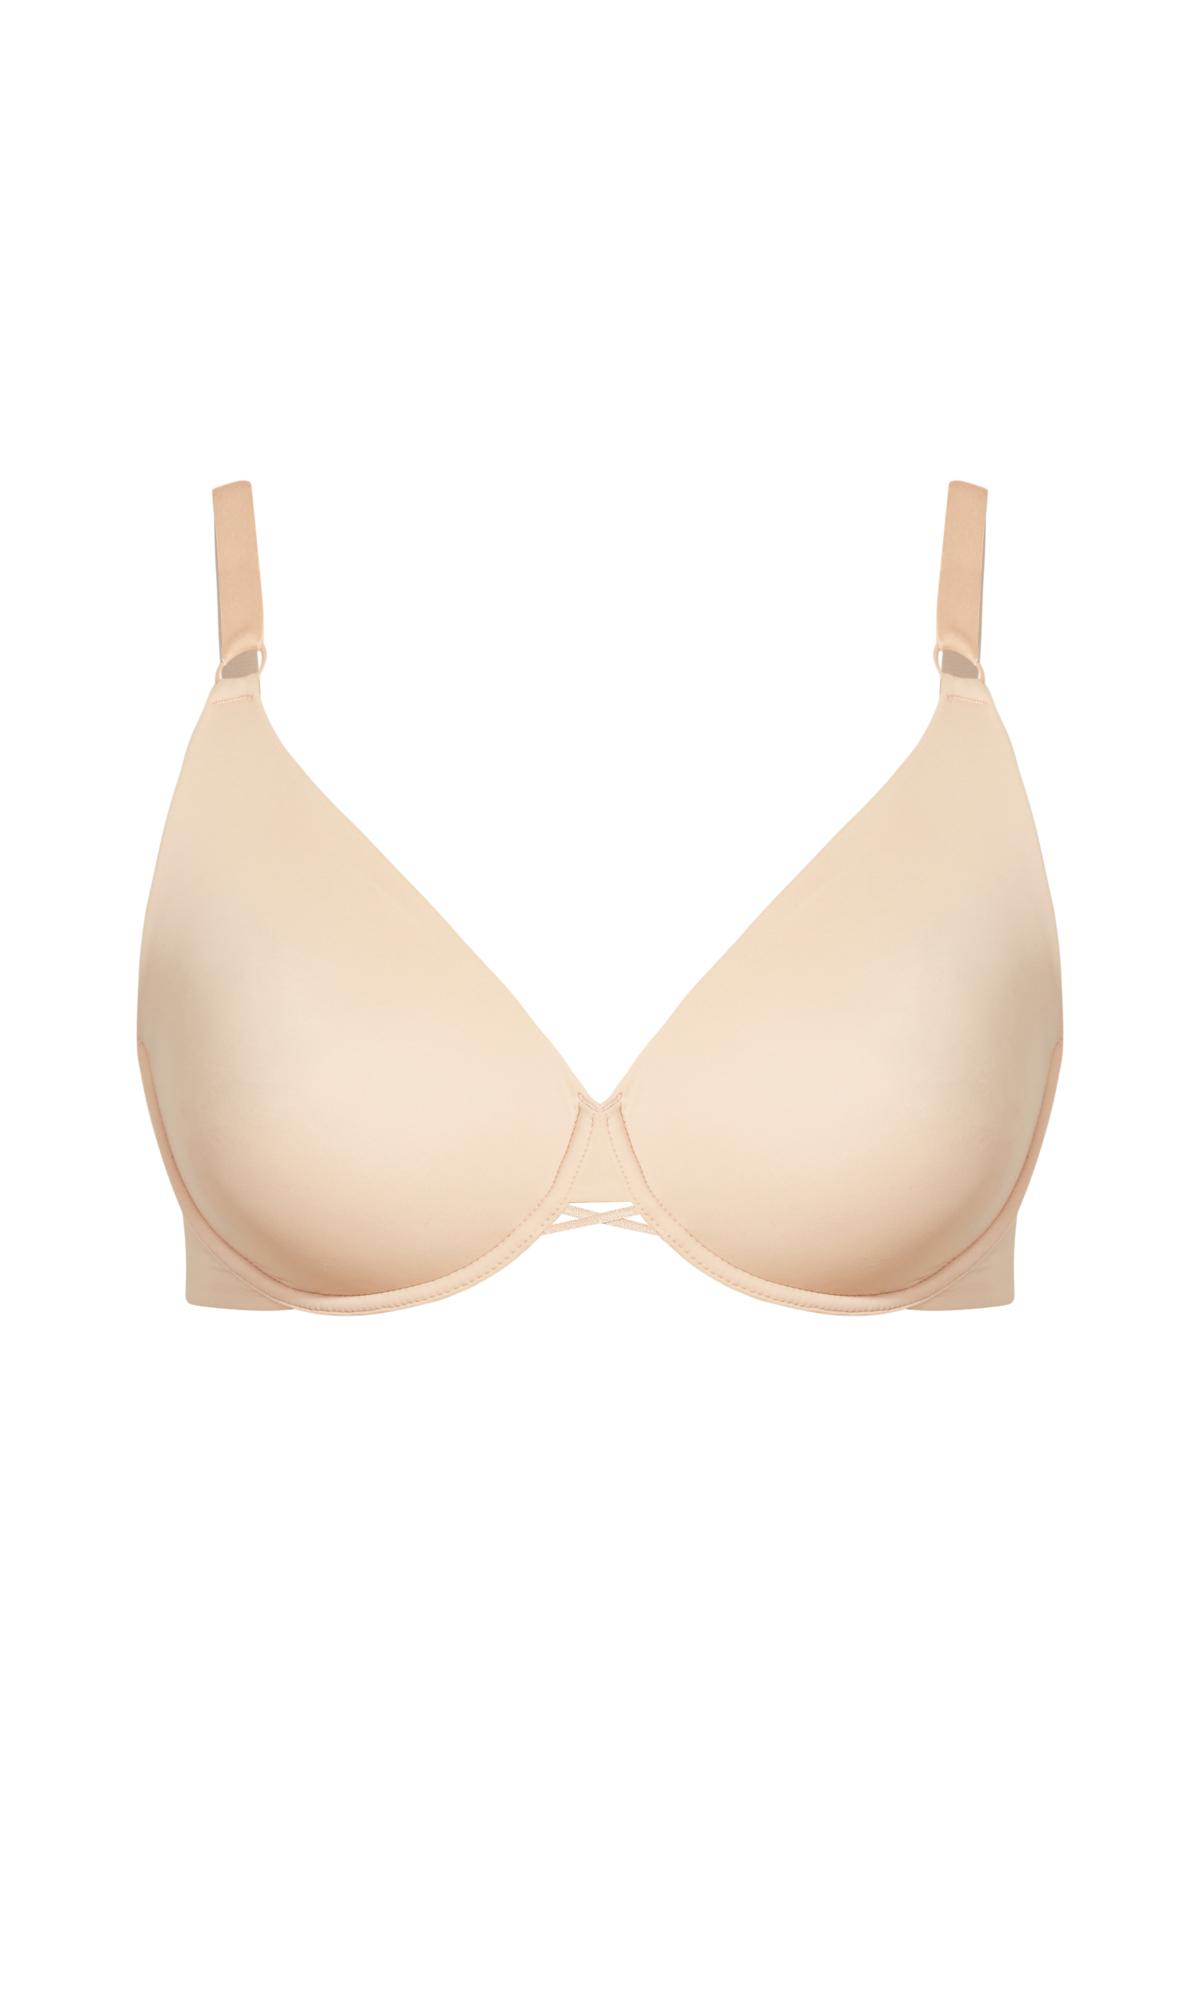 Avenue: 2 back smoother bras size 42DD in ST7 Kidsgrove for £15.00 for sale